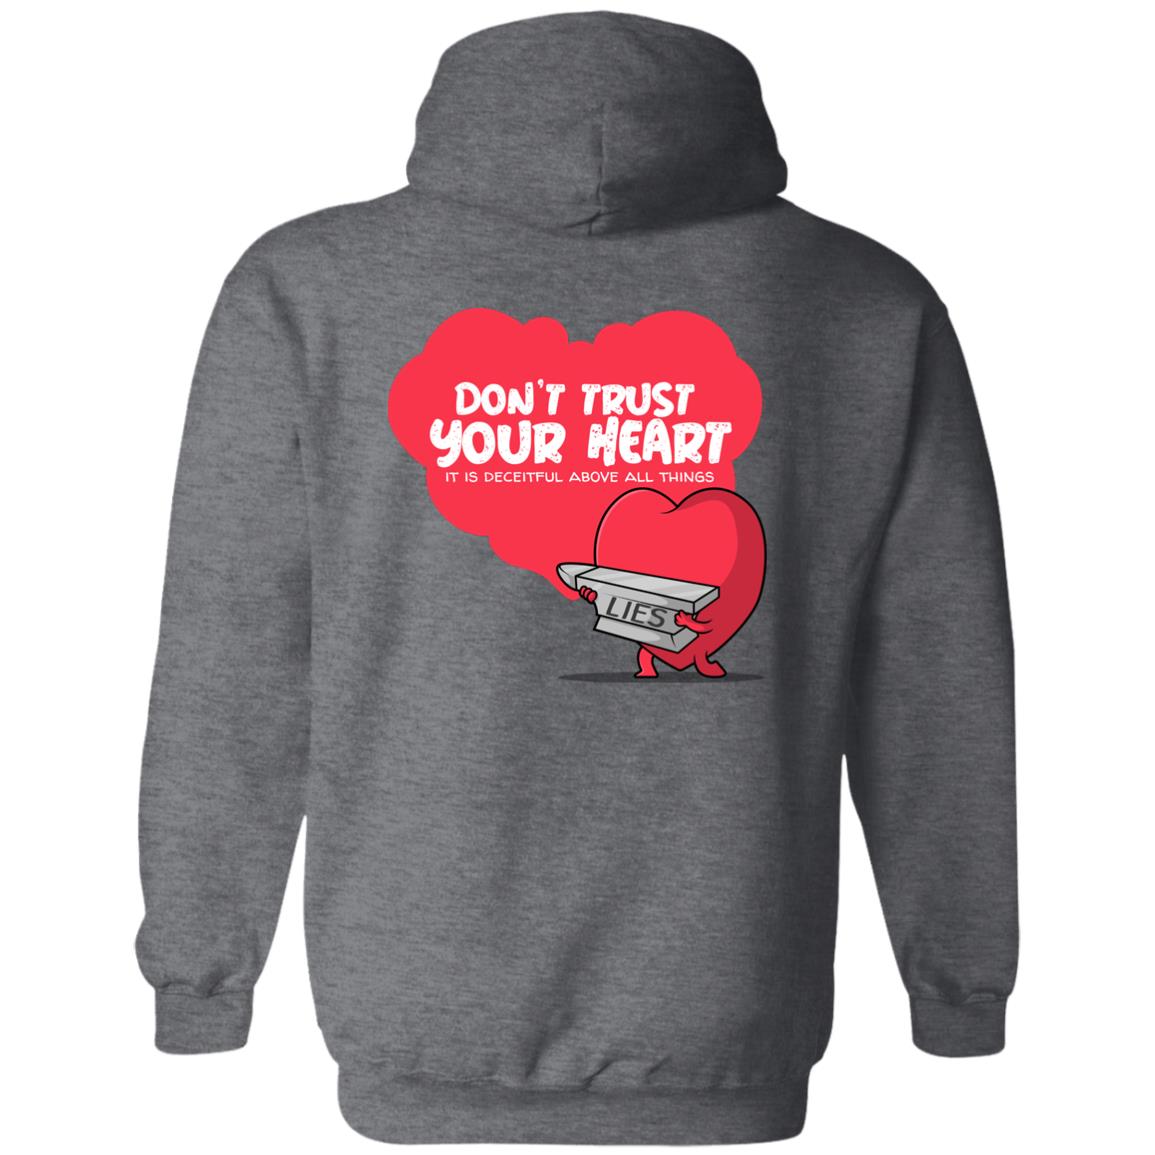 Don't Trust Your Heart (Unisex Hoodie)